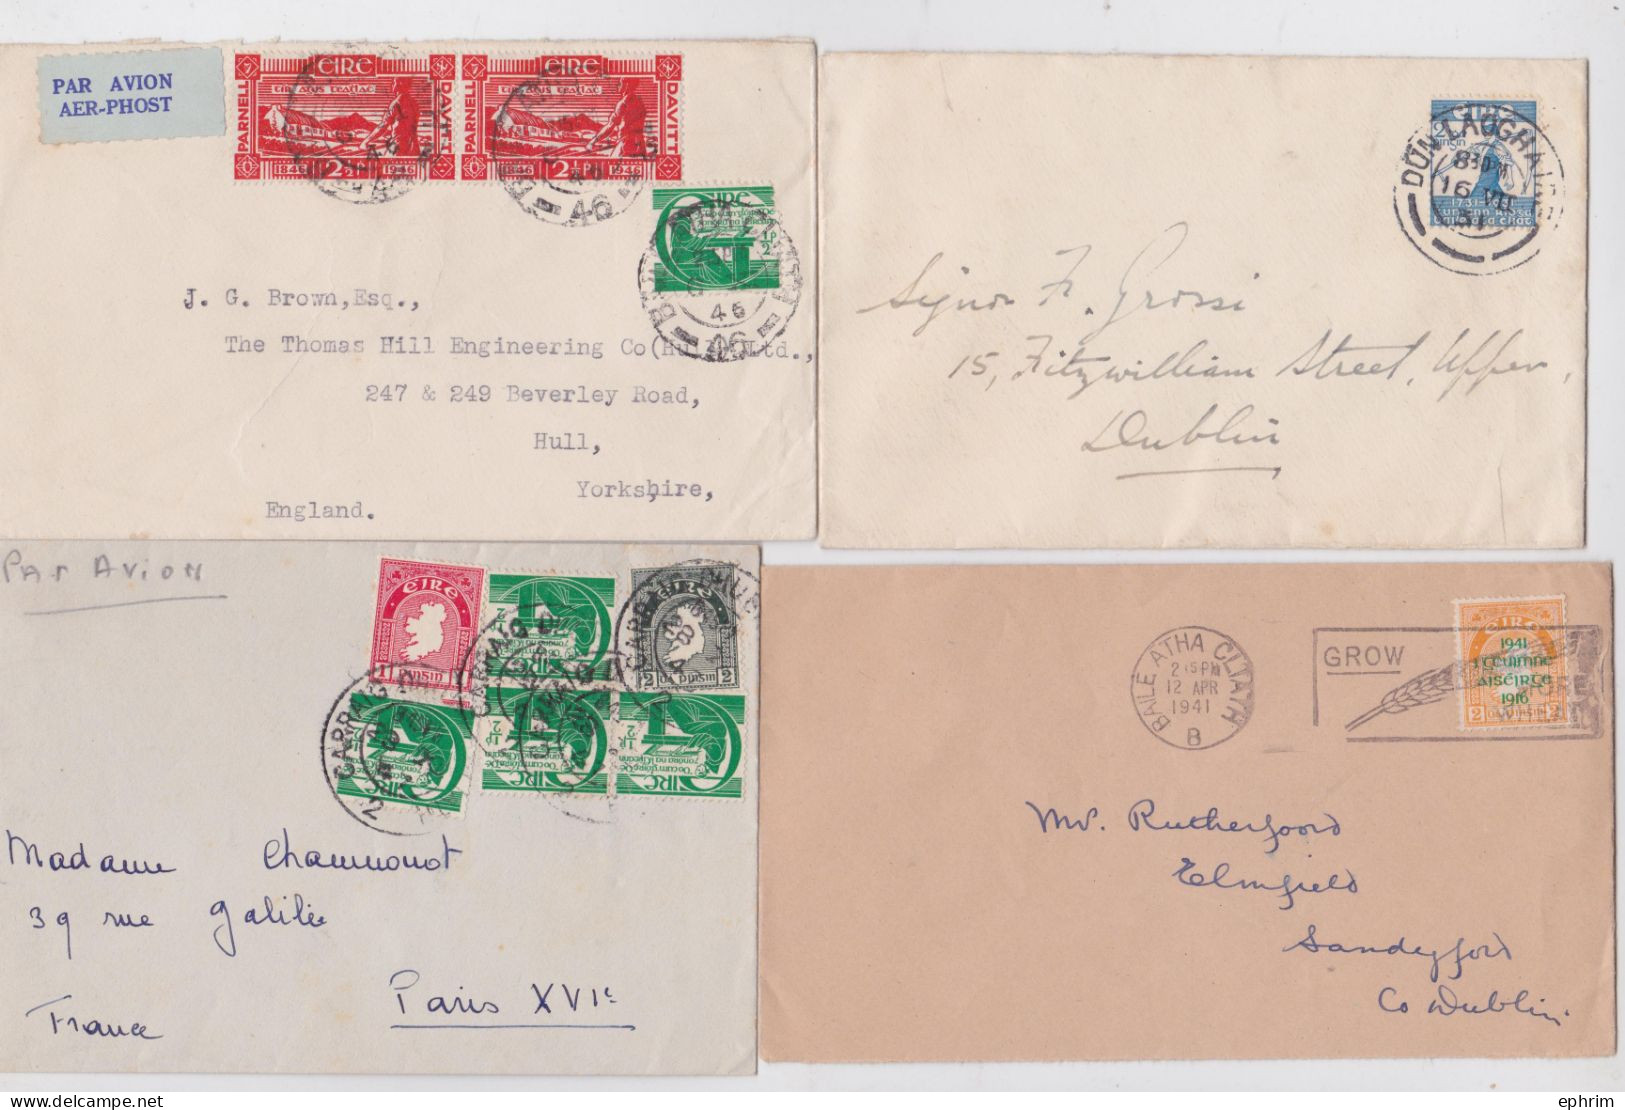 Irlande Eire Ireland Stamp Short Old Mail Cover Lettre Timbre Lot 16 Lettres Anciennes Baile Atha Cliath Dun Laoghaire.. - Verzamelingen & Reeksen